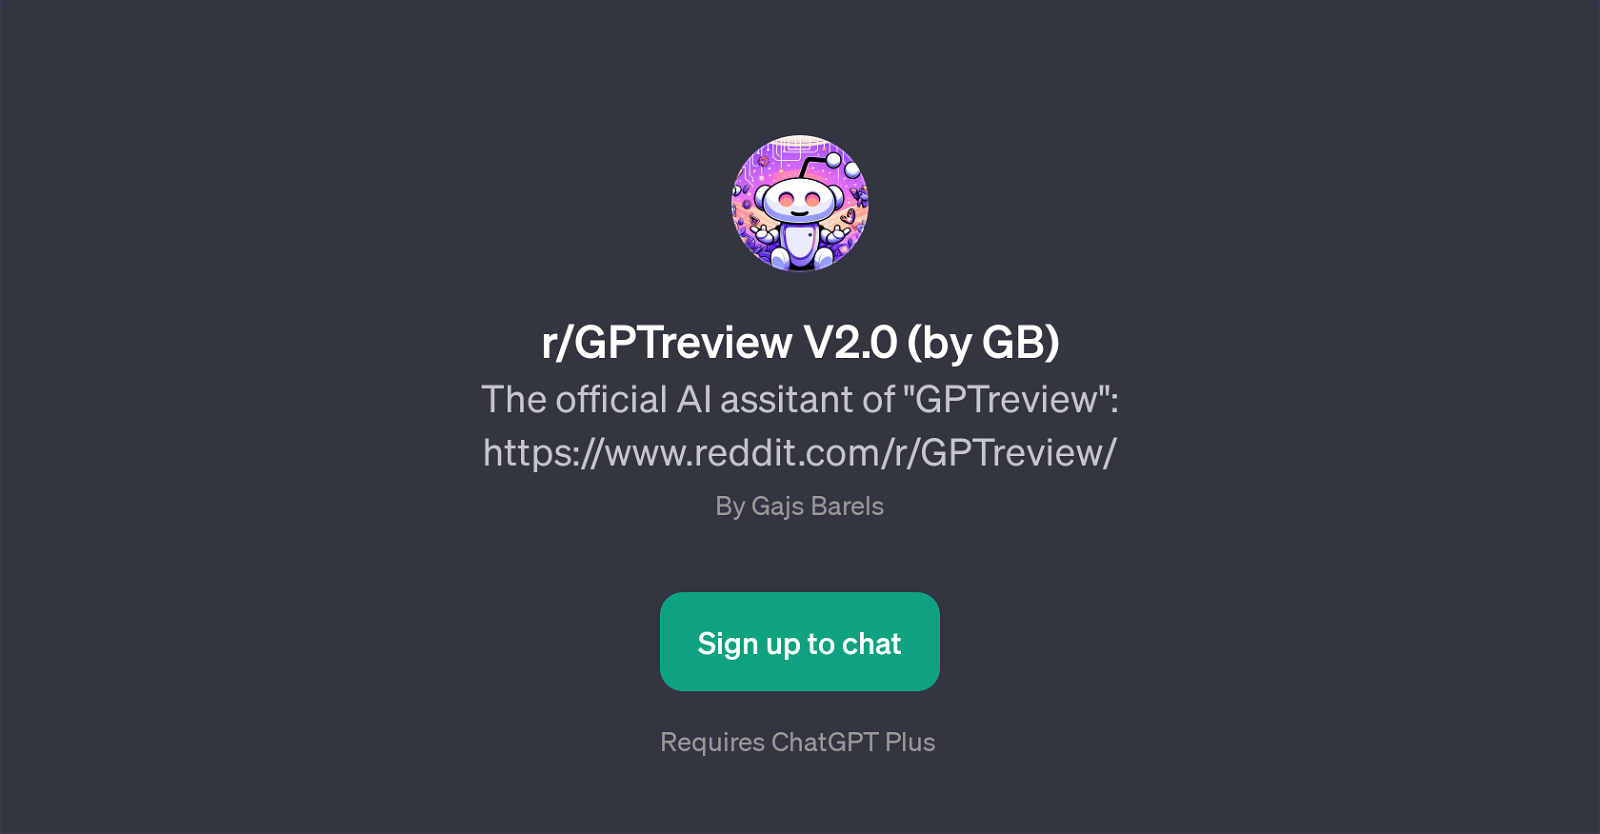 r/GPTreview V2.0 (by GB) website